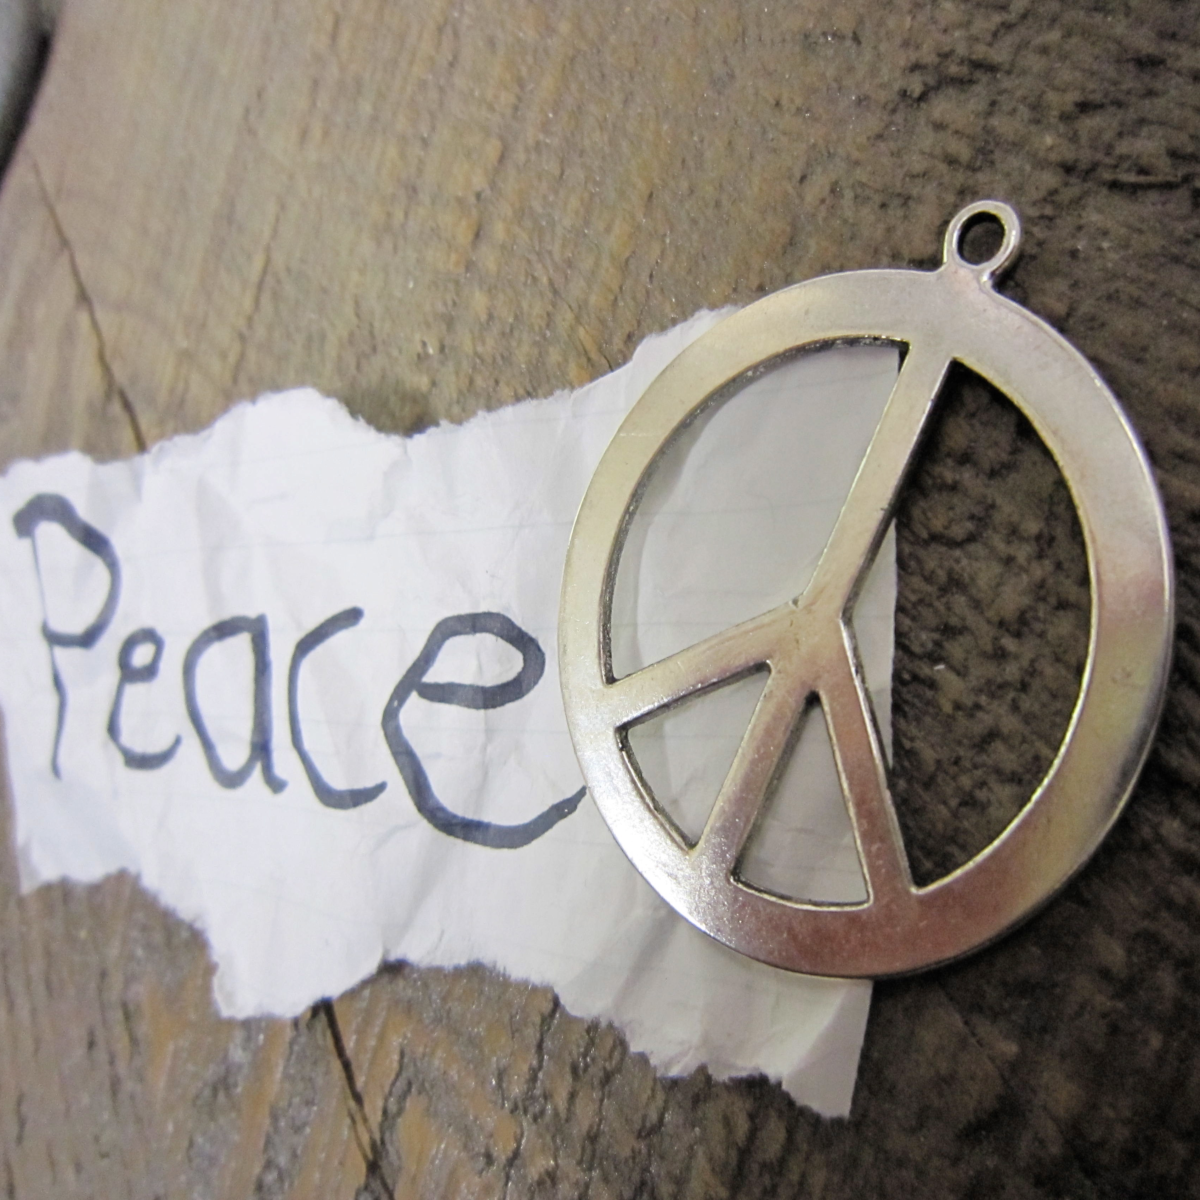 photo of peace symbol and torn sheet of paper with word peace on it